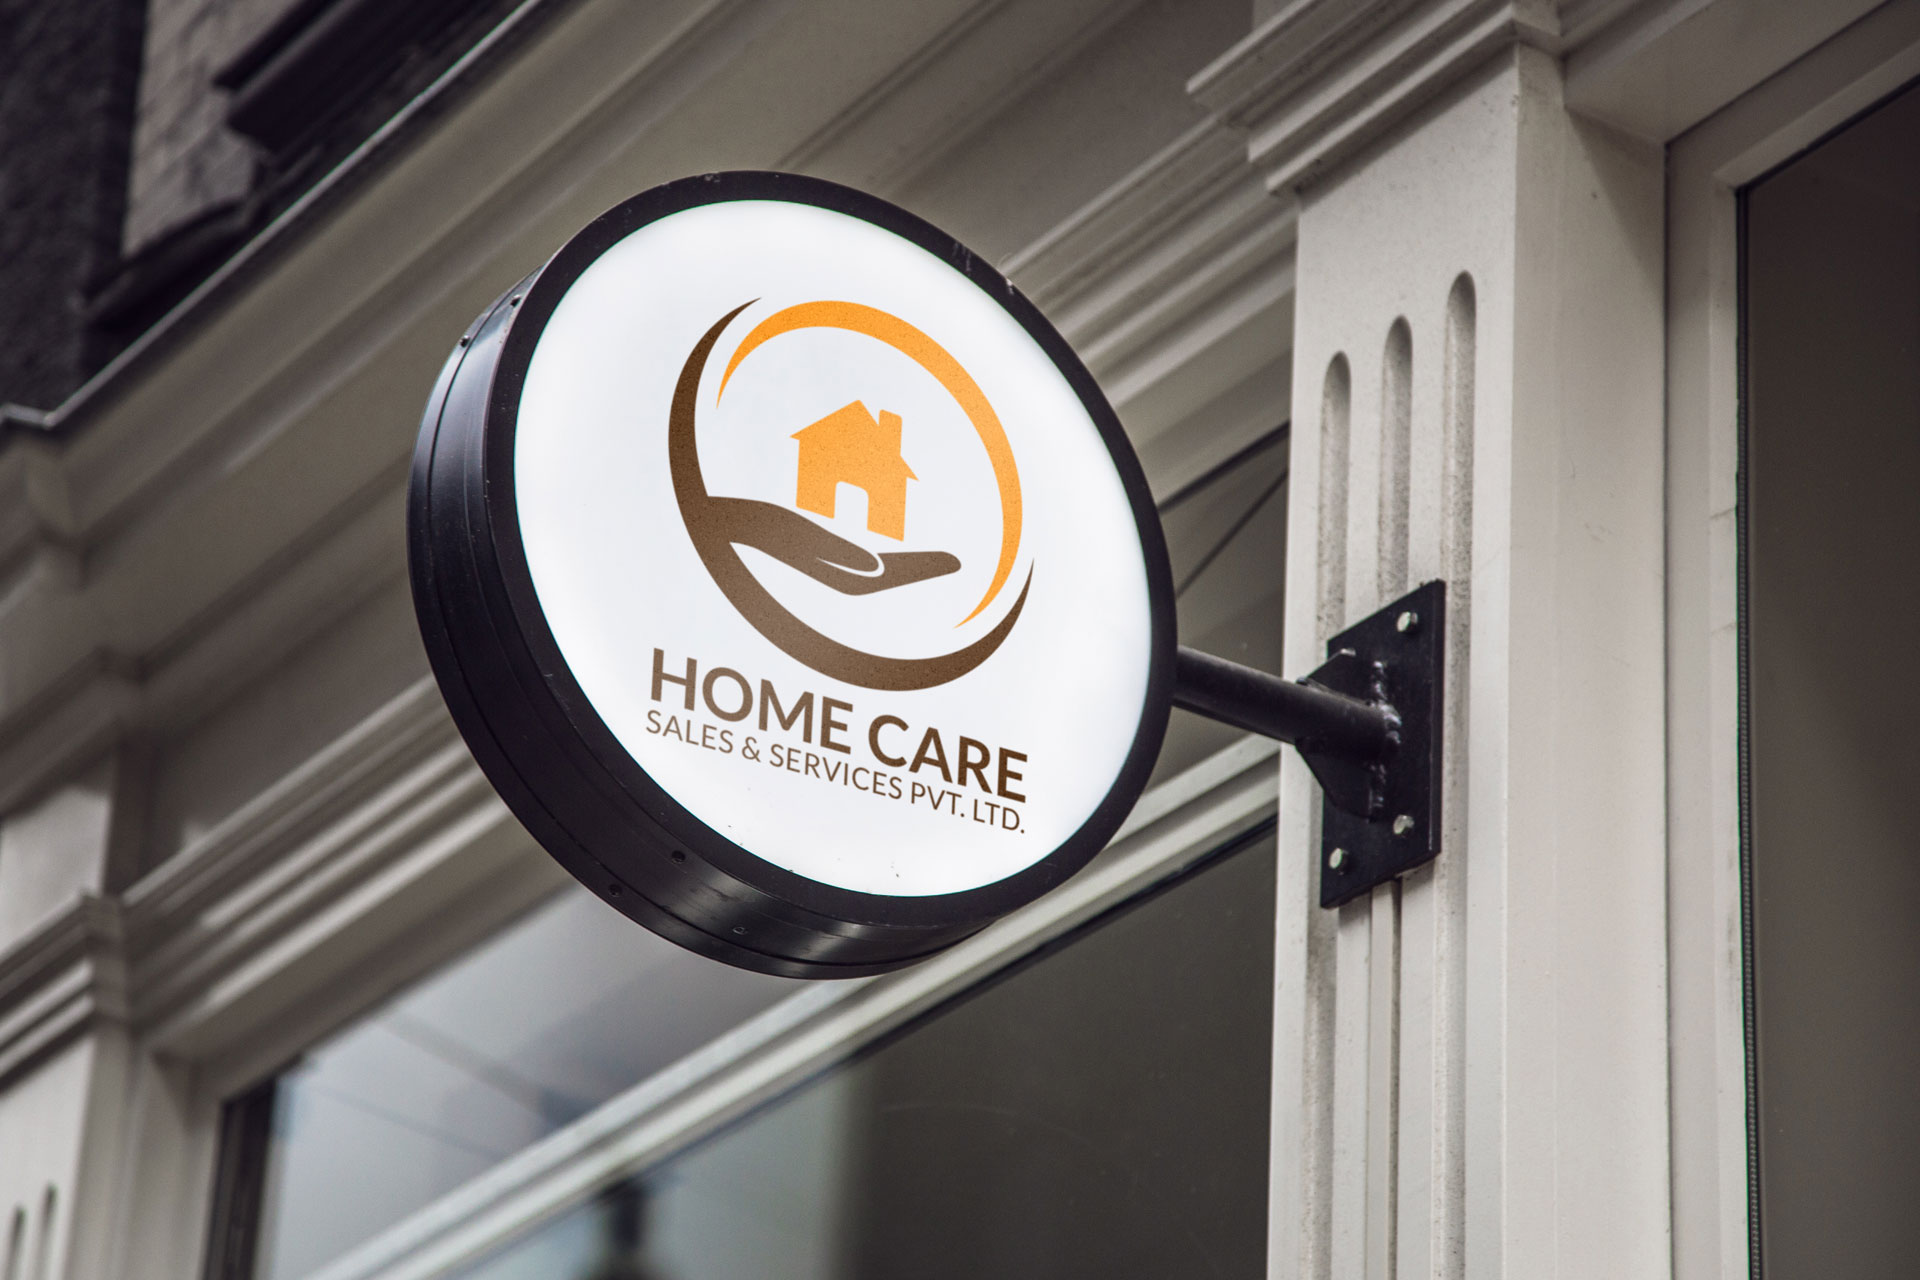 Home Care Sales and Services is an agency that takes care of your home internally and externally. Their main services are Pest Control Services, Water Proofing Services, etc.